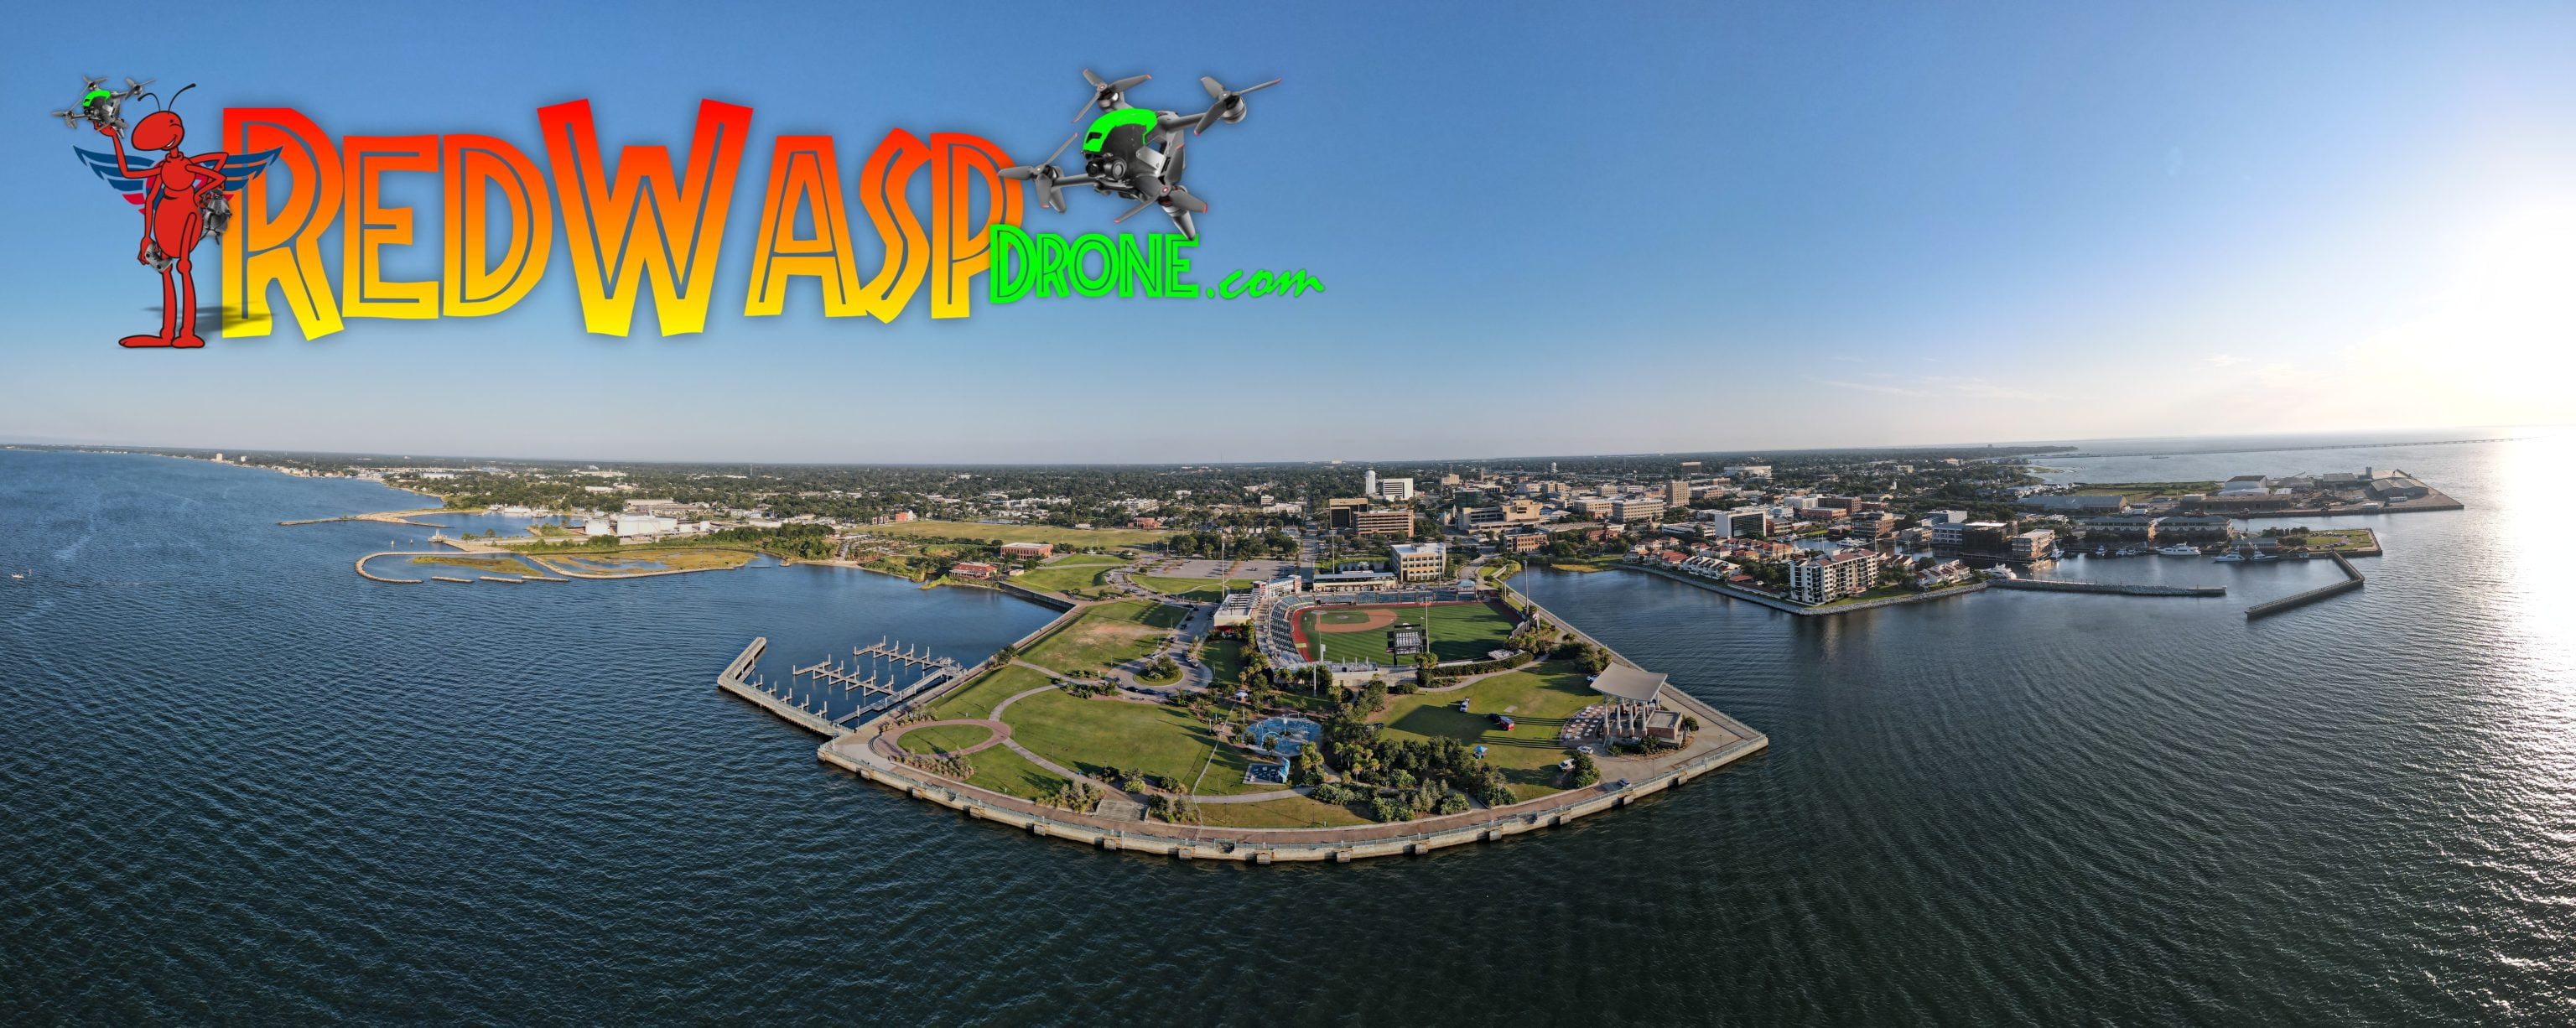 Blue Wahoos Aerials, RedWaspDrone Captures, Pensacola Aerials, Stunning Stadium Shots, Aerial Photography Masterpieces, Elevated Perspective, Drone Artistry, Birds Eye View, Baseball From Above, Spectacular Drone Shots,